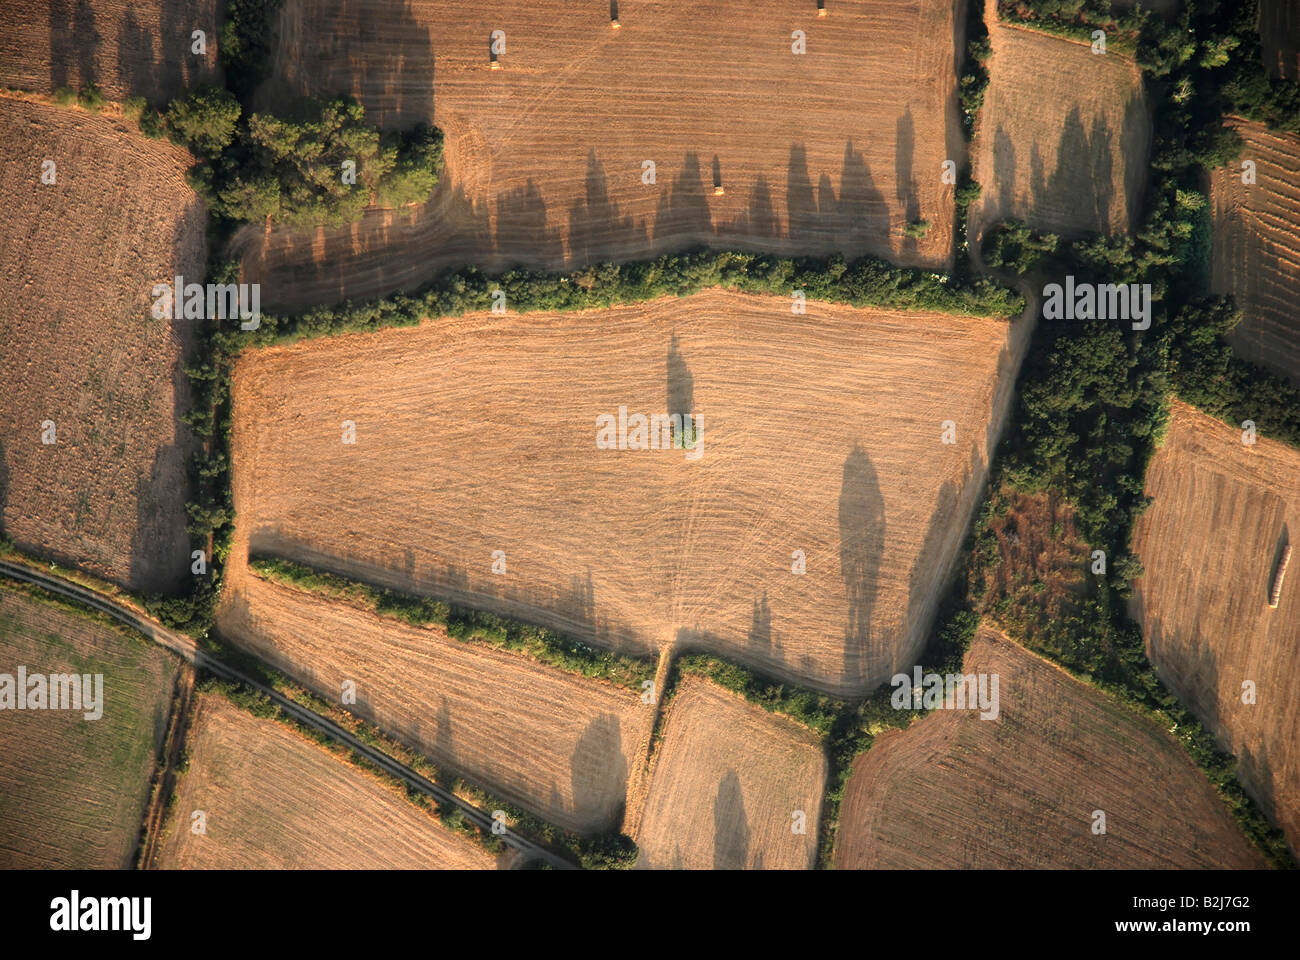 Spain Catalonia agricultural fields elevated view Stock Photo